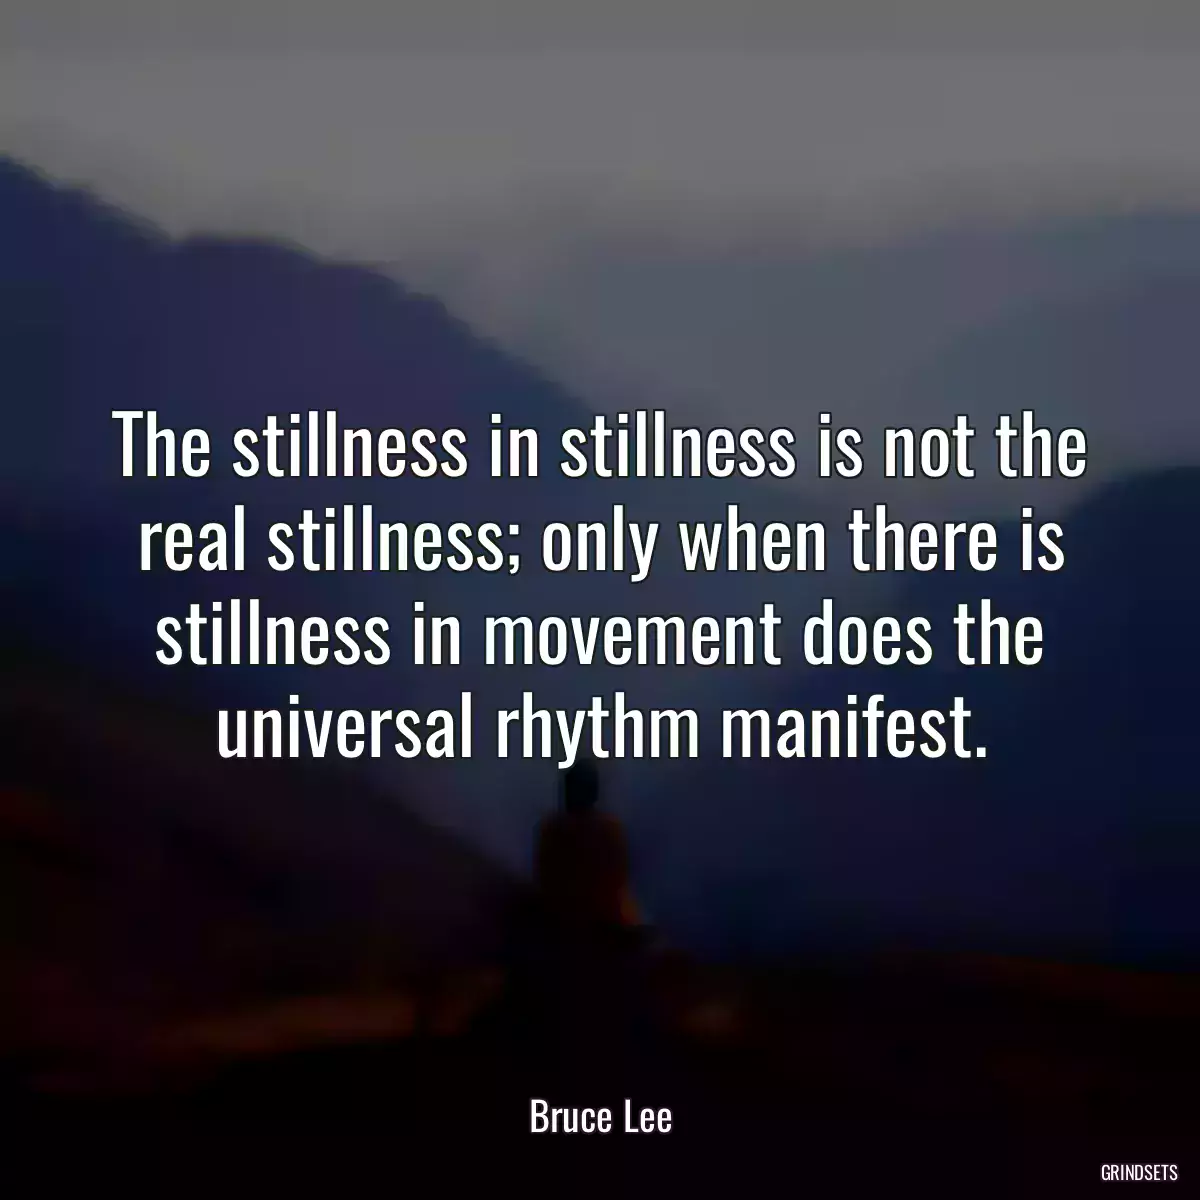 The stillness in stillness is not the real stillness; only when there is stillness in movement does the universal rhythm manifest.